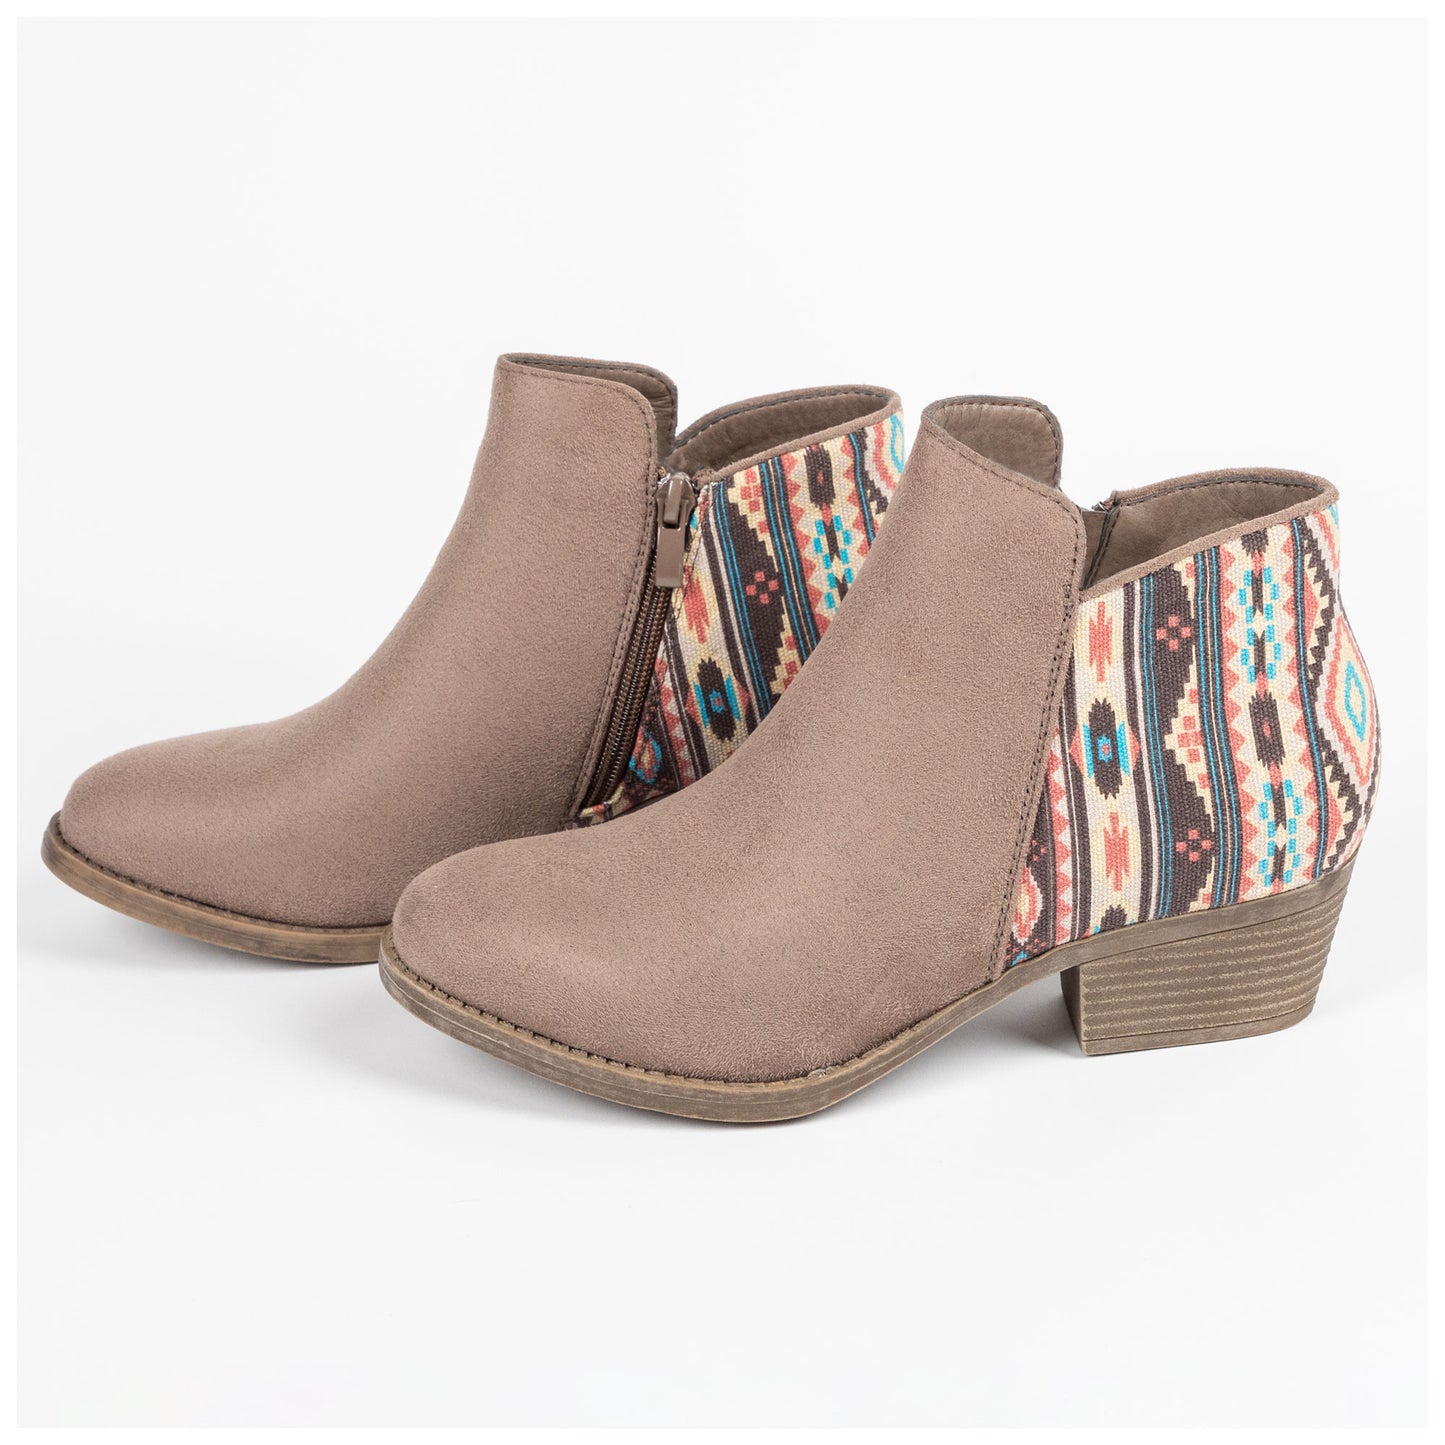 Boutique by Corkys Prevail Low-Heeled Boots